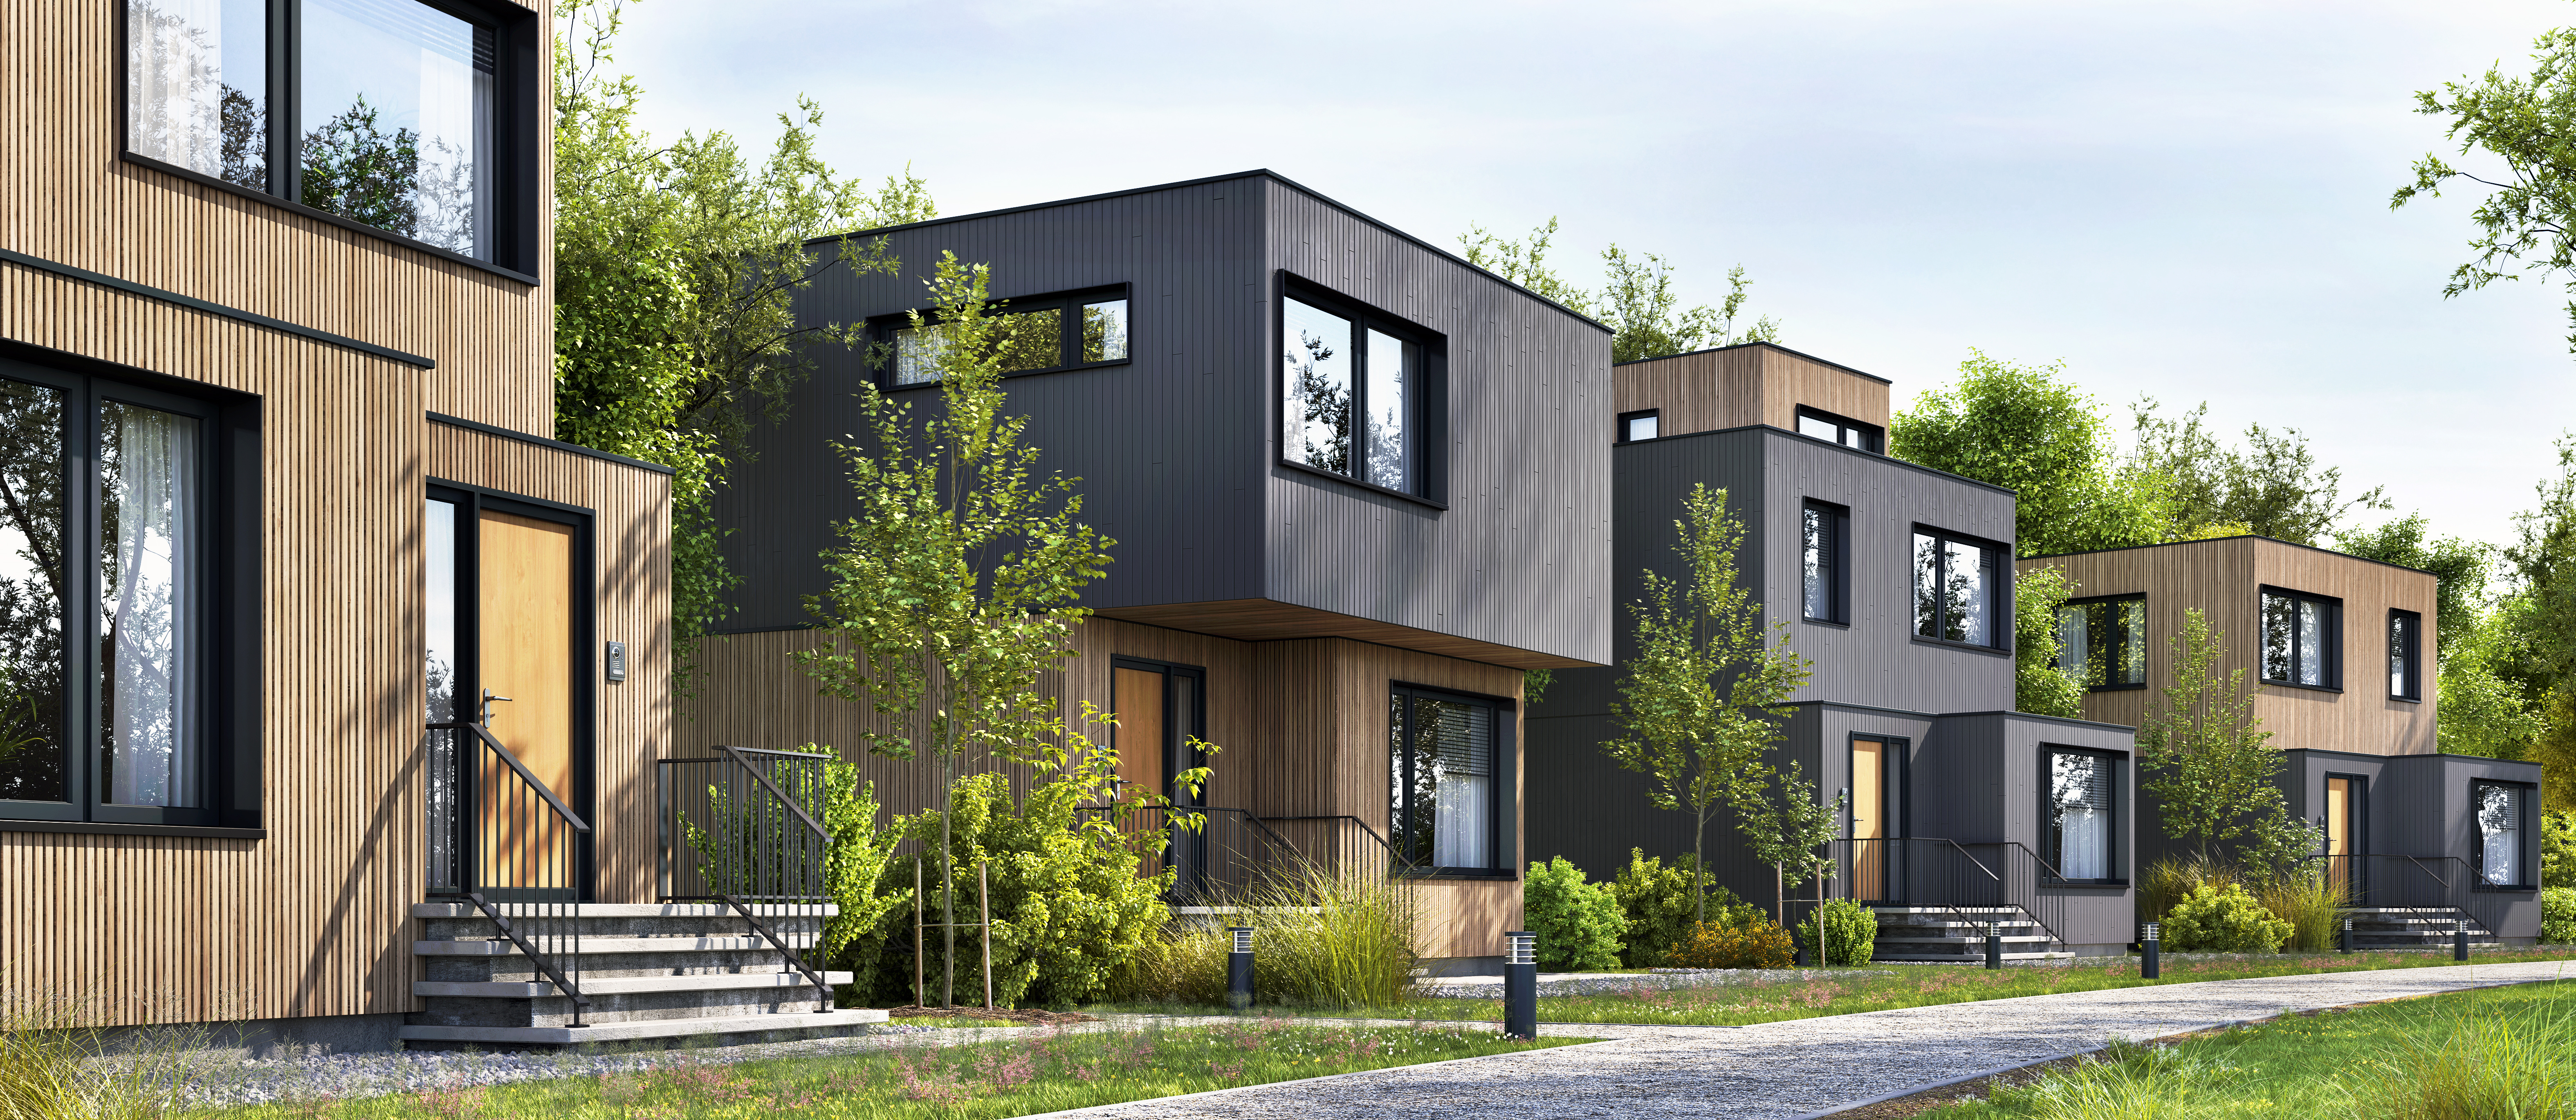 A street with modular homes in a row